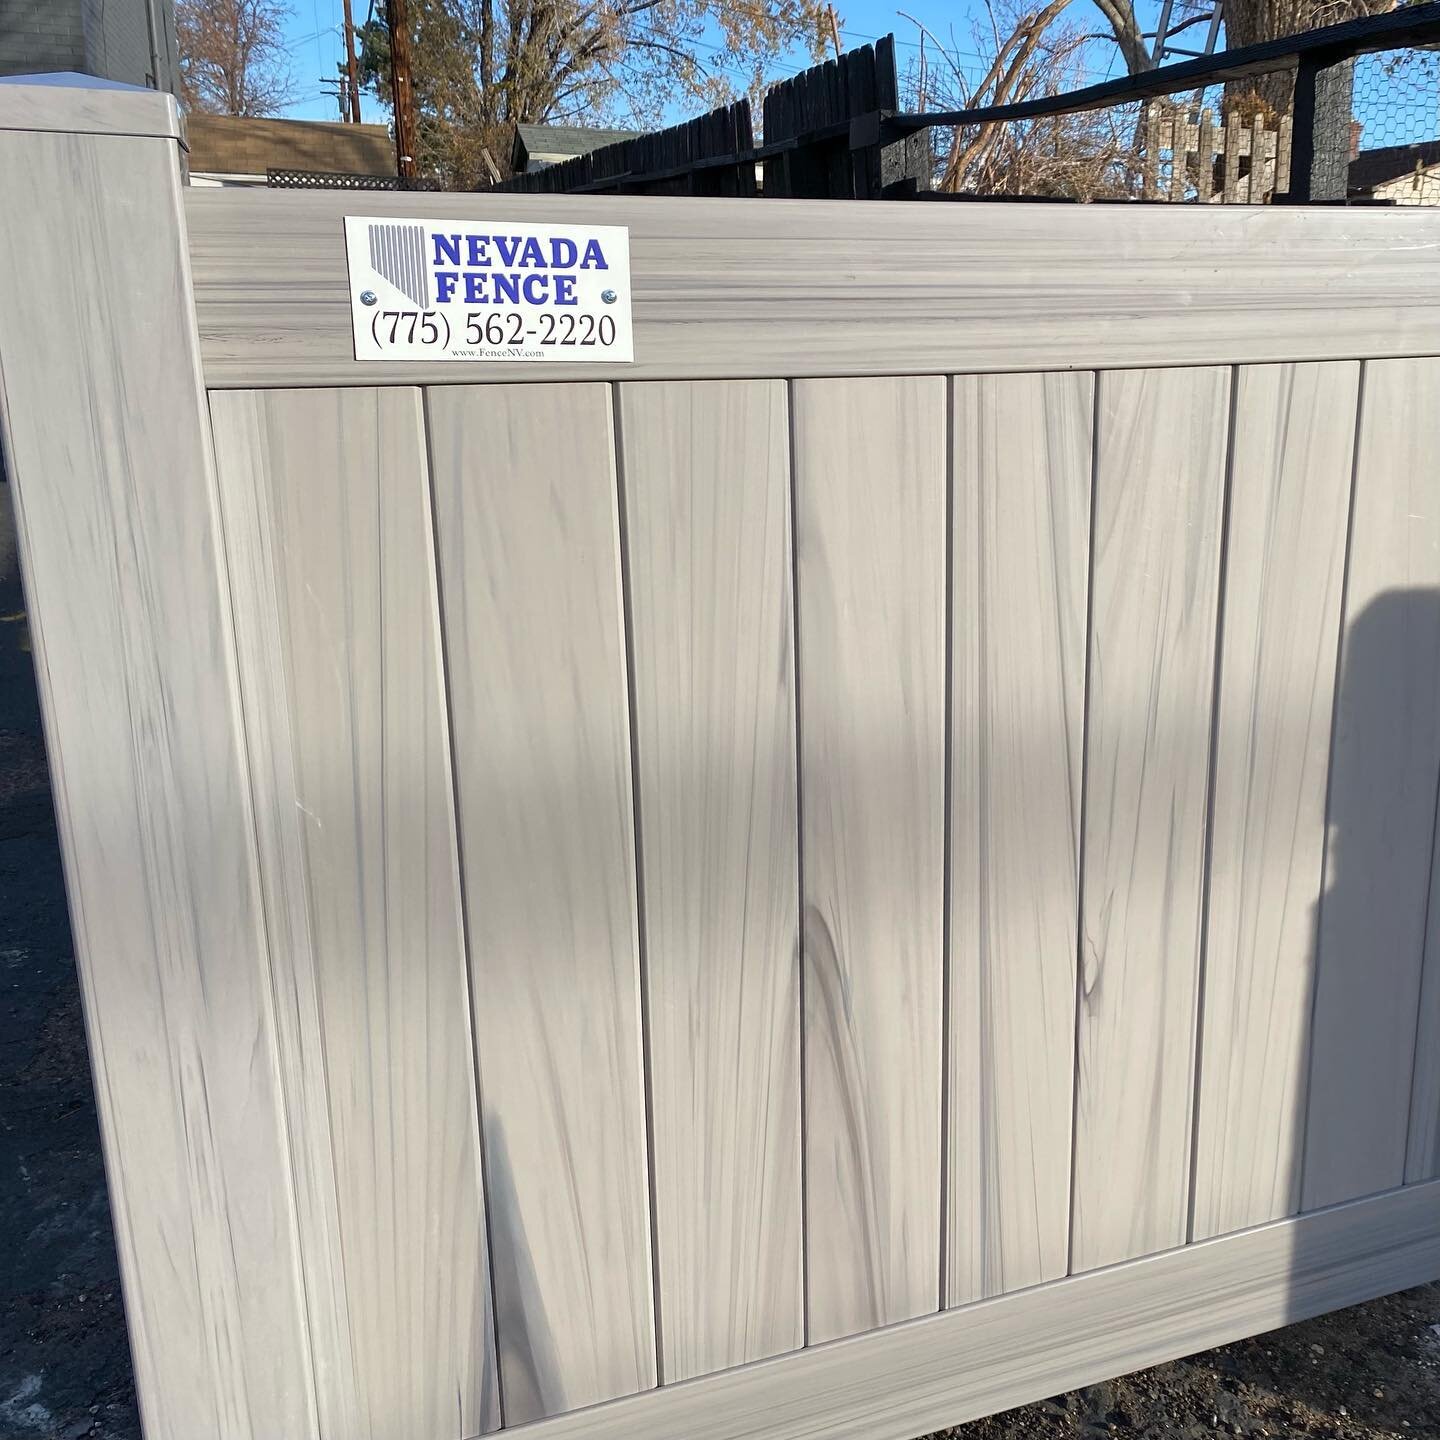 Coastal Cedar Vinyl 🐚🌲 Raise the value of your property with a special color of vinyl. 
#BuiltToLast #NevadaFence #VinylFencing